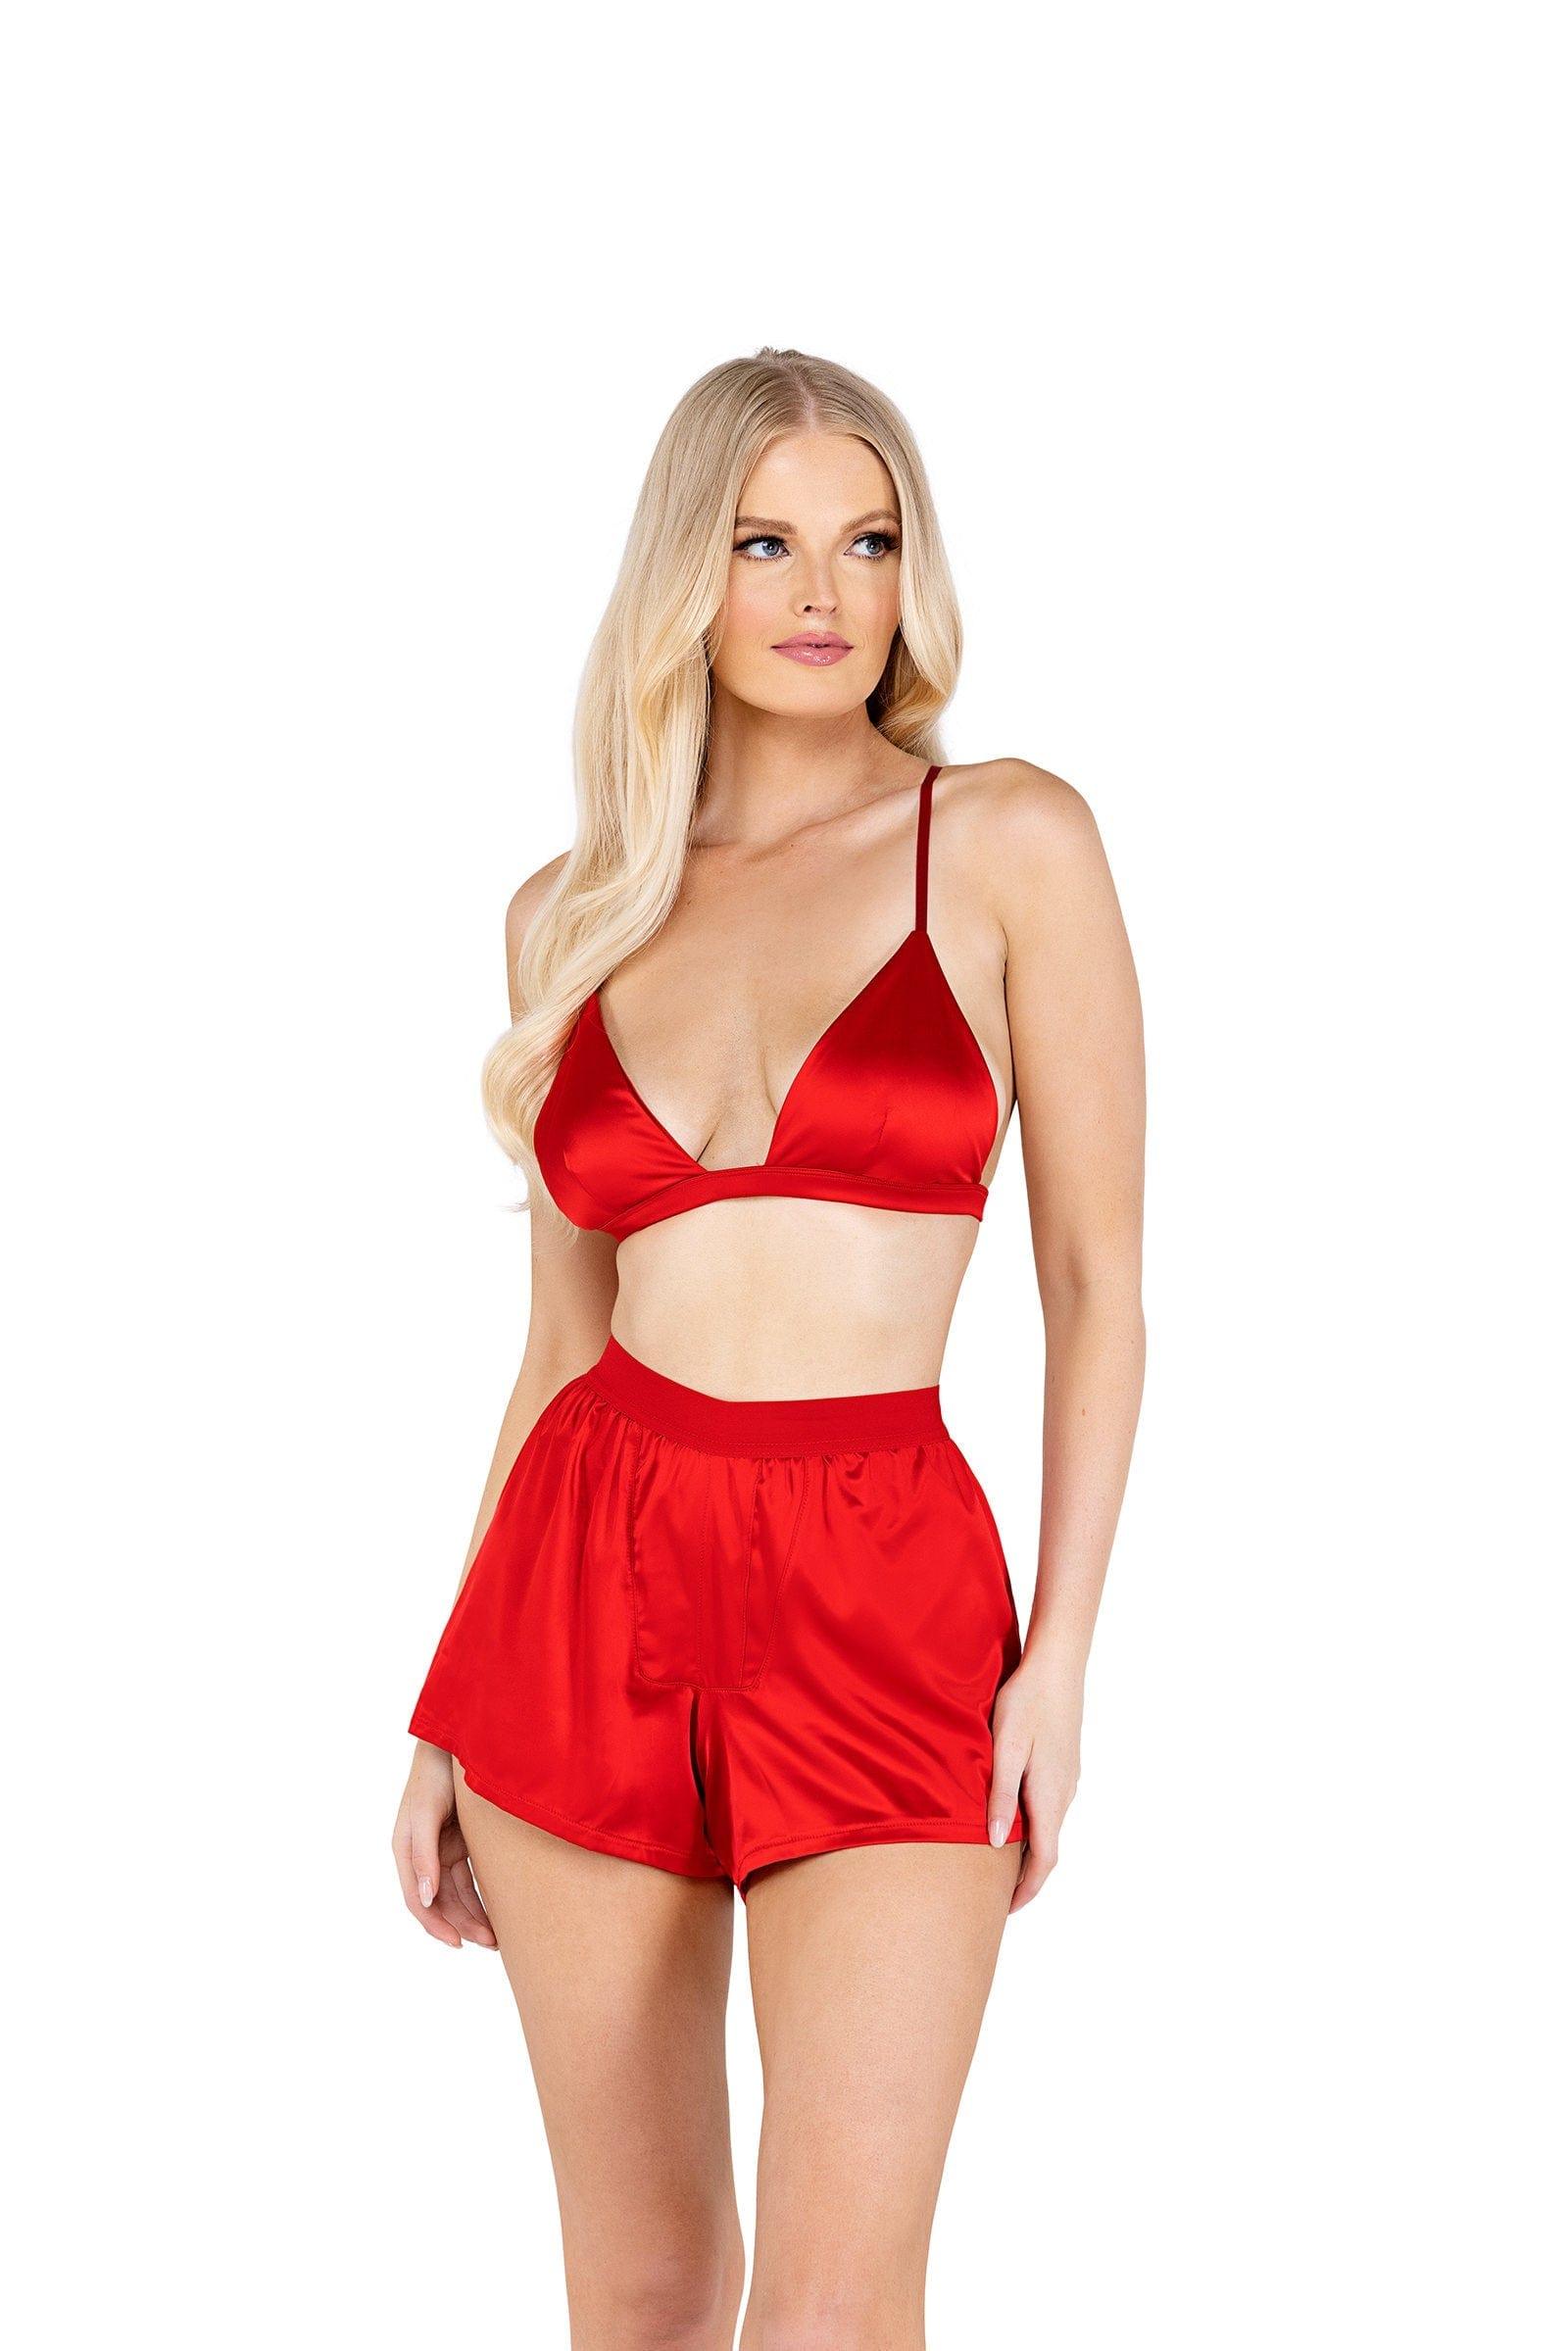 Roma Confidential 2 Piece Sets XSmall / Red Satin Lounge Set with Triangle Top & Boxing Shorts